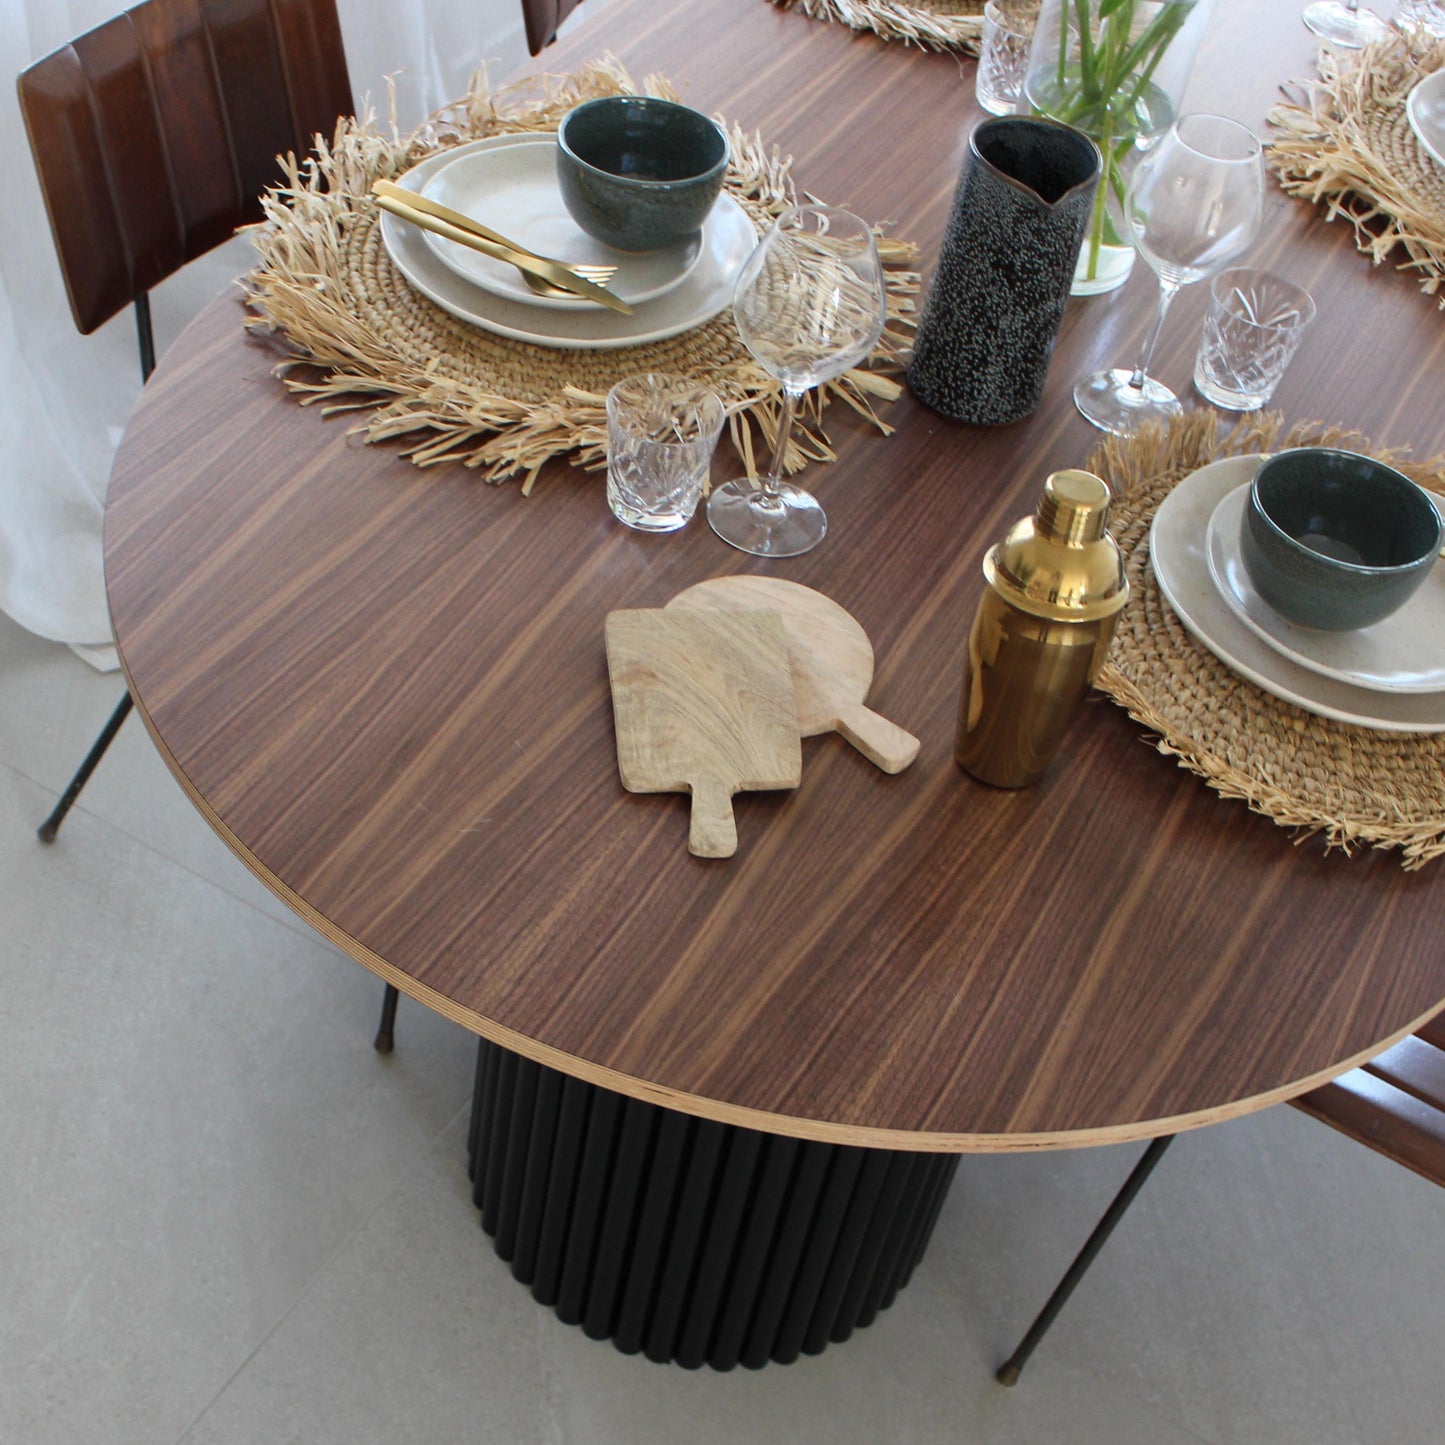 Bloom Oval Dining Table - Walnut